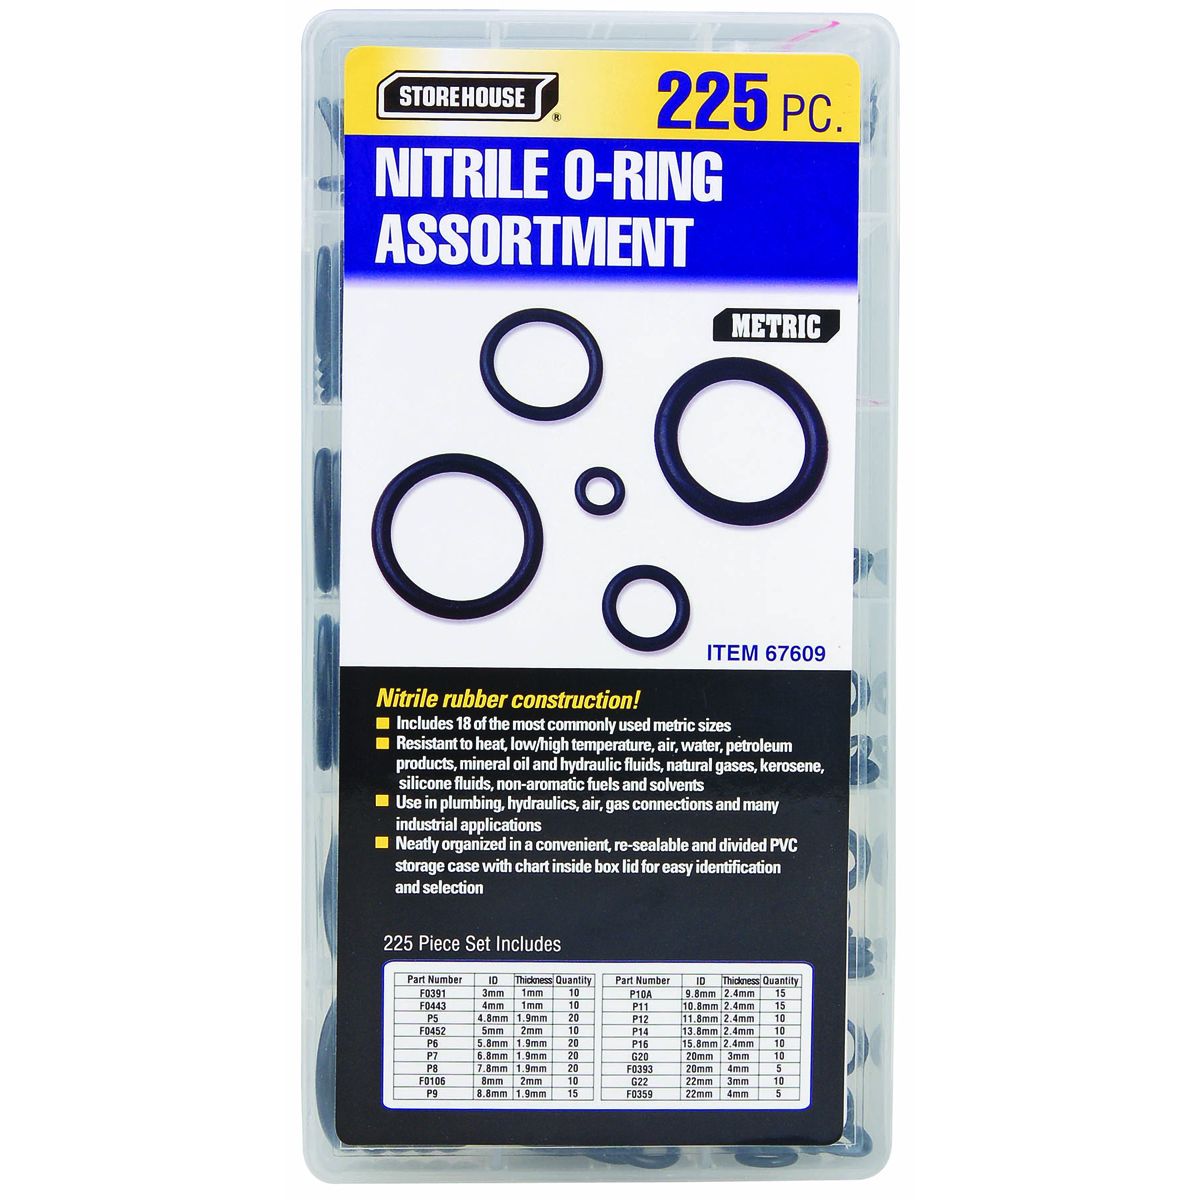 STOREHOUSE 225 Piece Metric Nitrile O-Ring Assortment